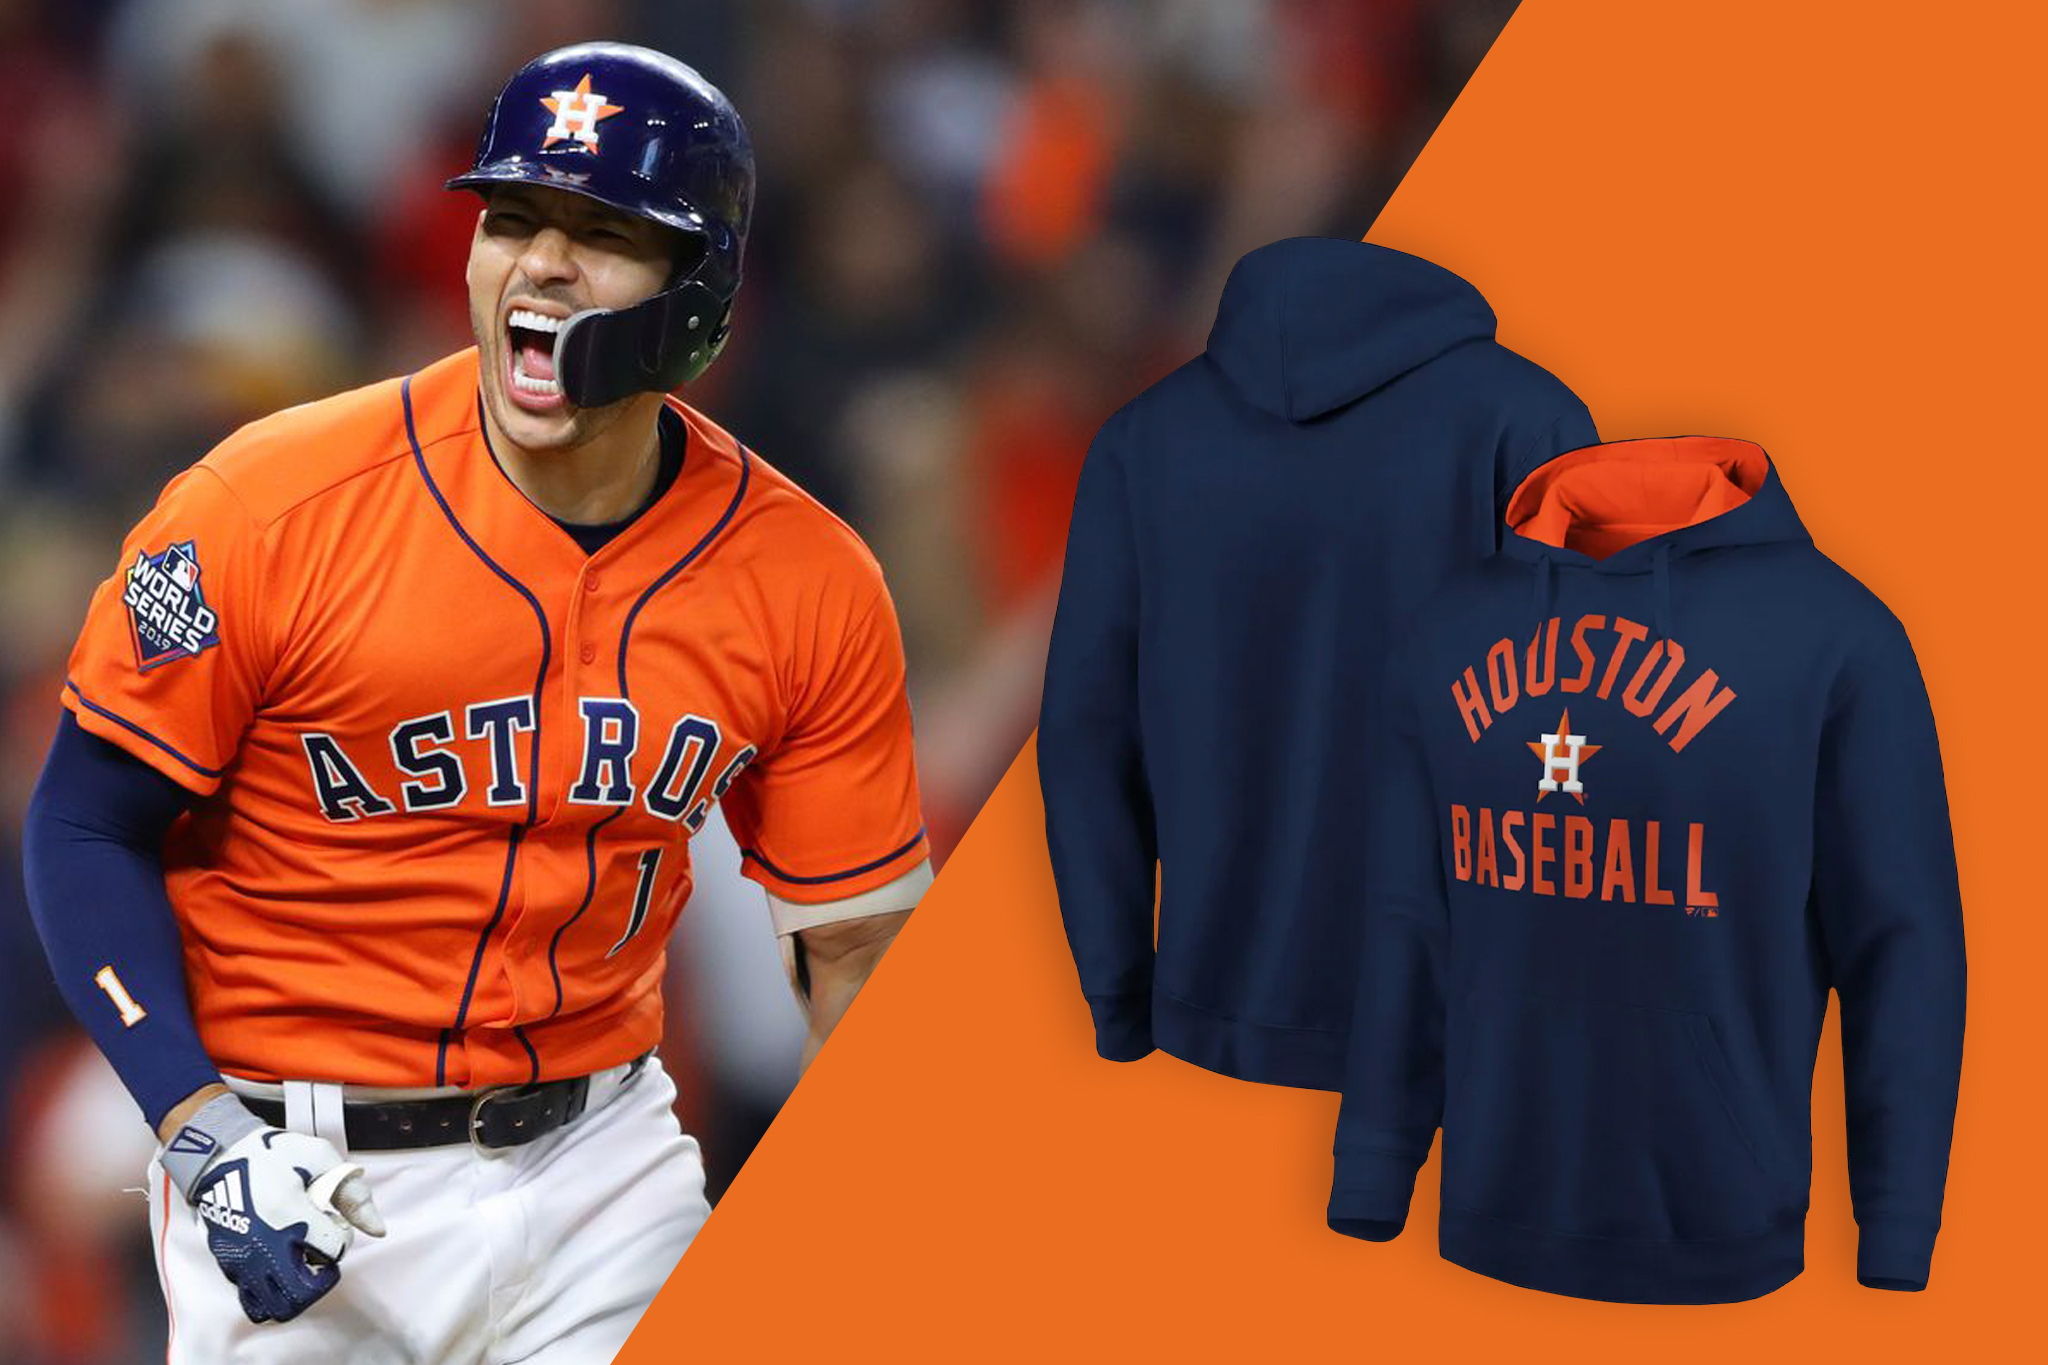 Astros and Texans gear is up to 30% off at Fanatics right now